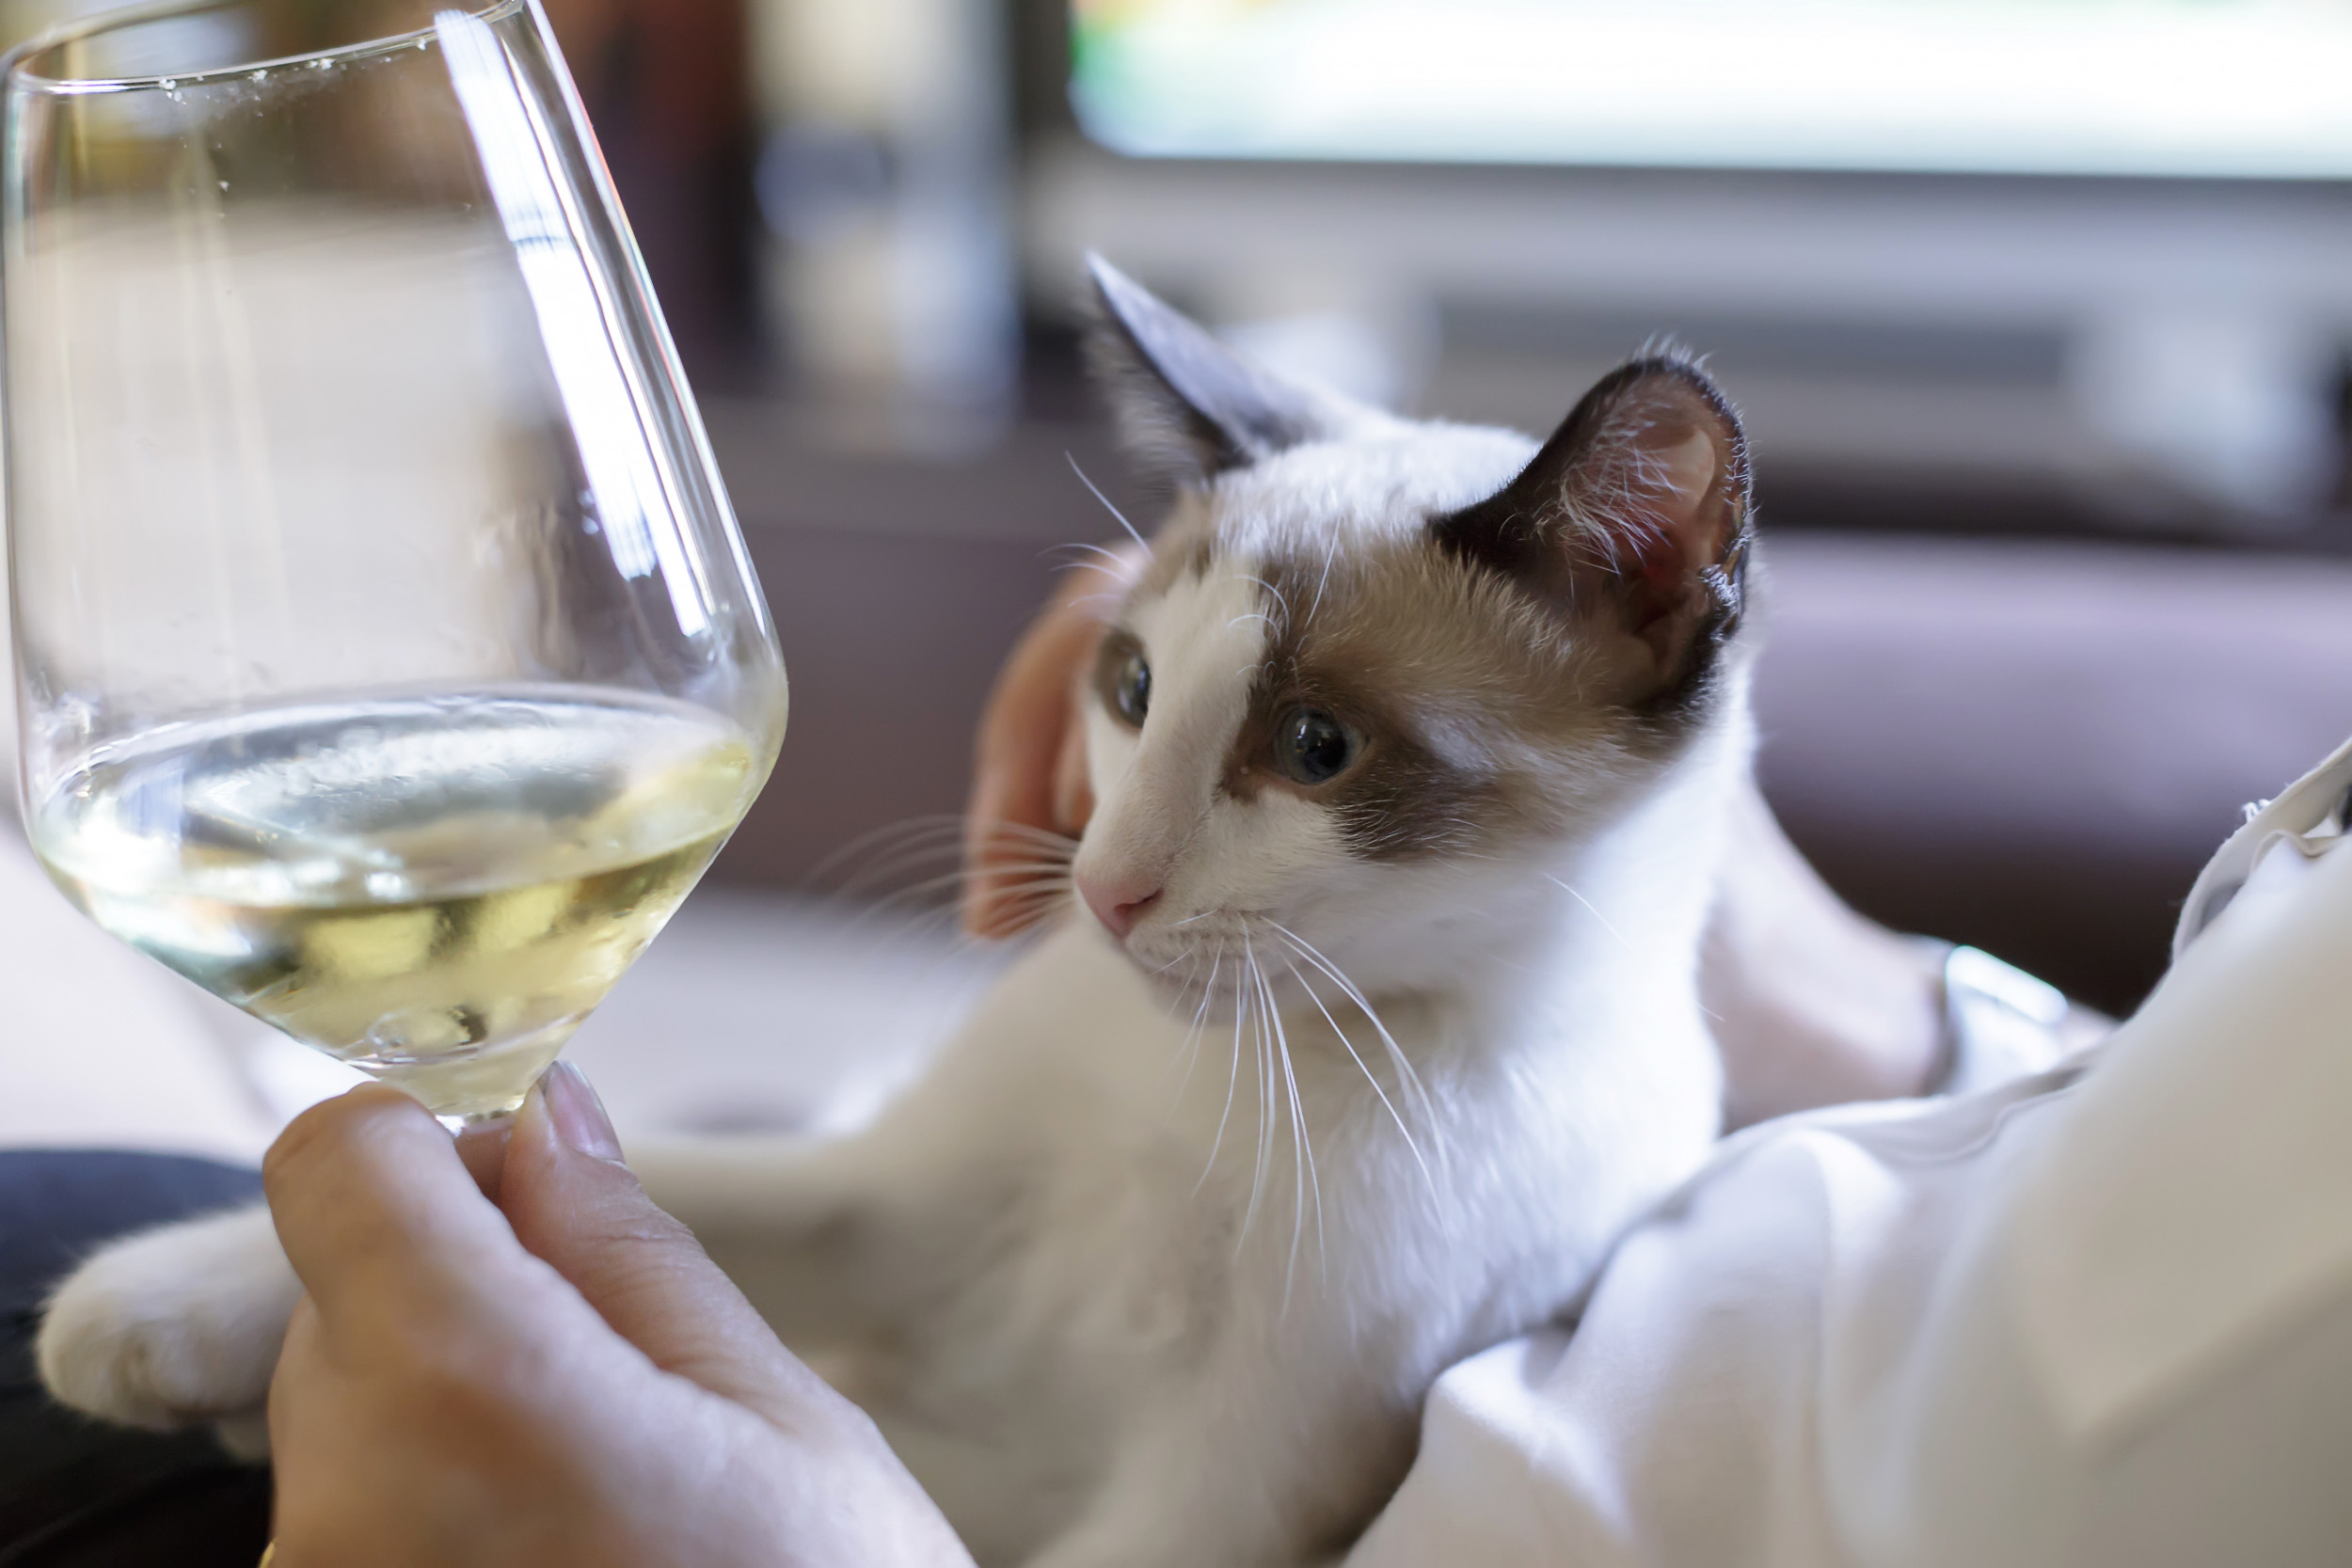 Cat Named Whiskey ‘Whining for Wine’ Leaves the Internet in Stitches